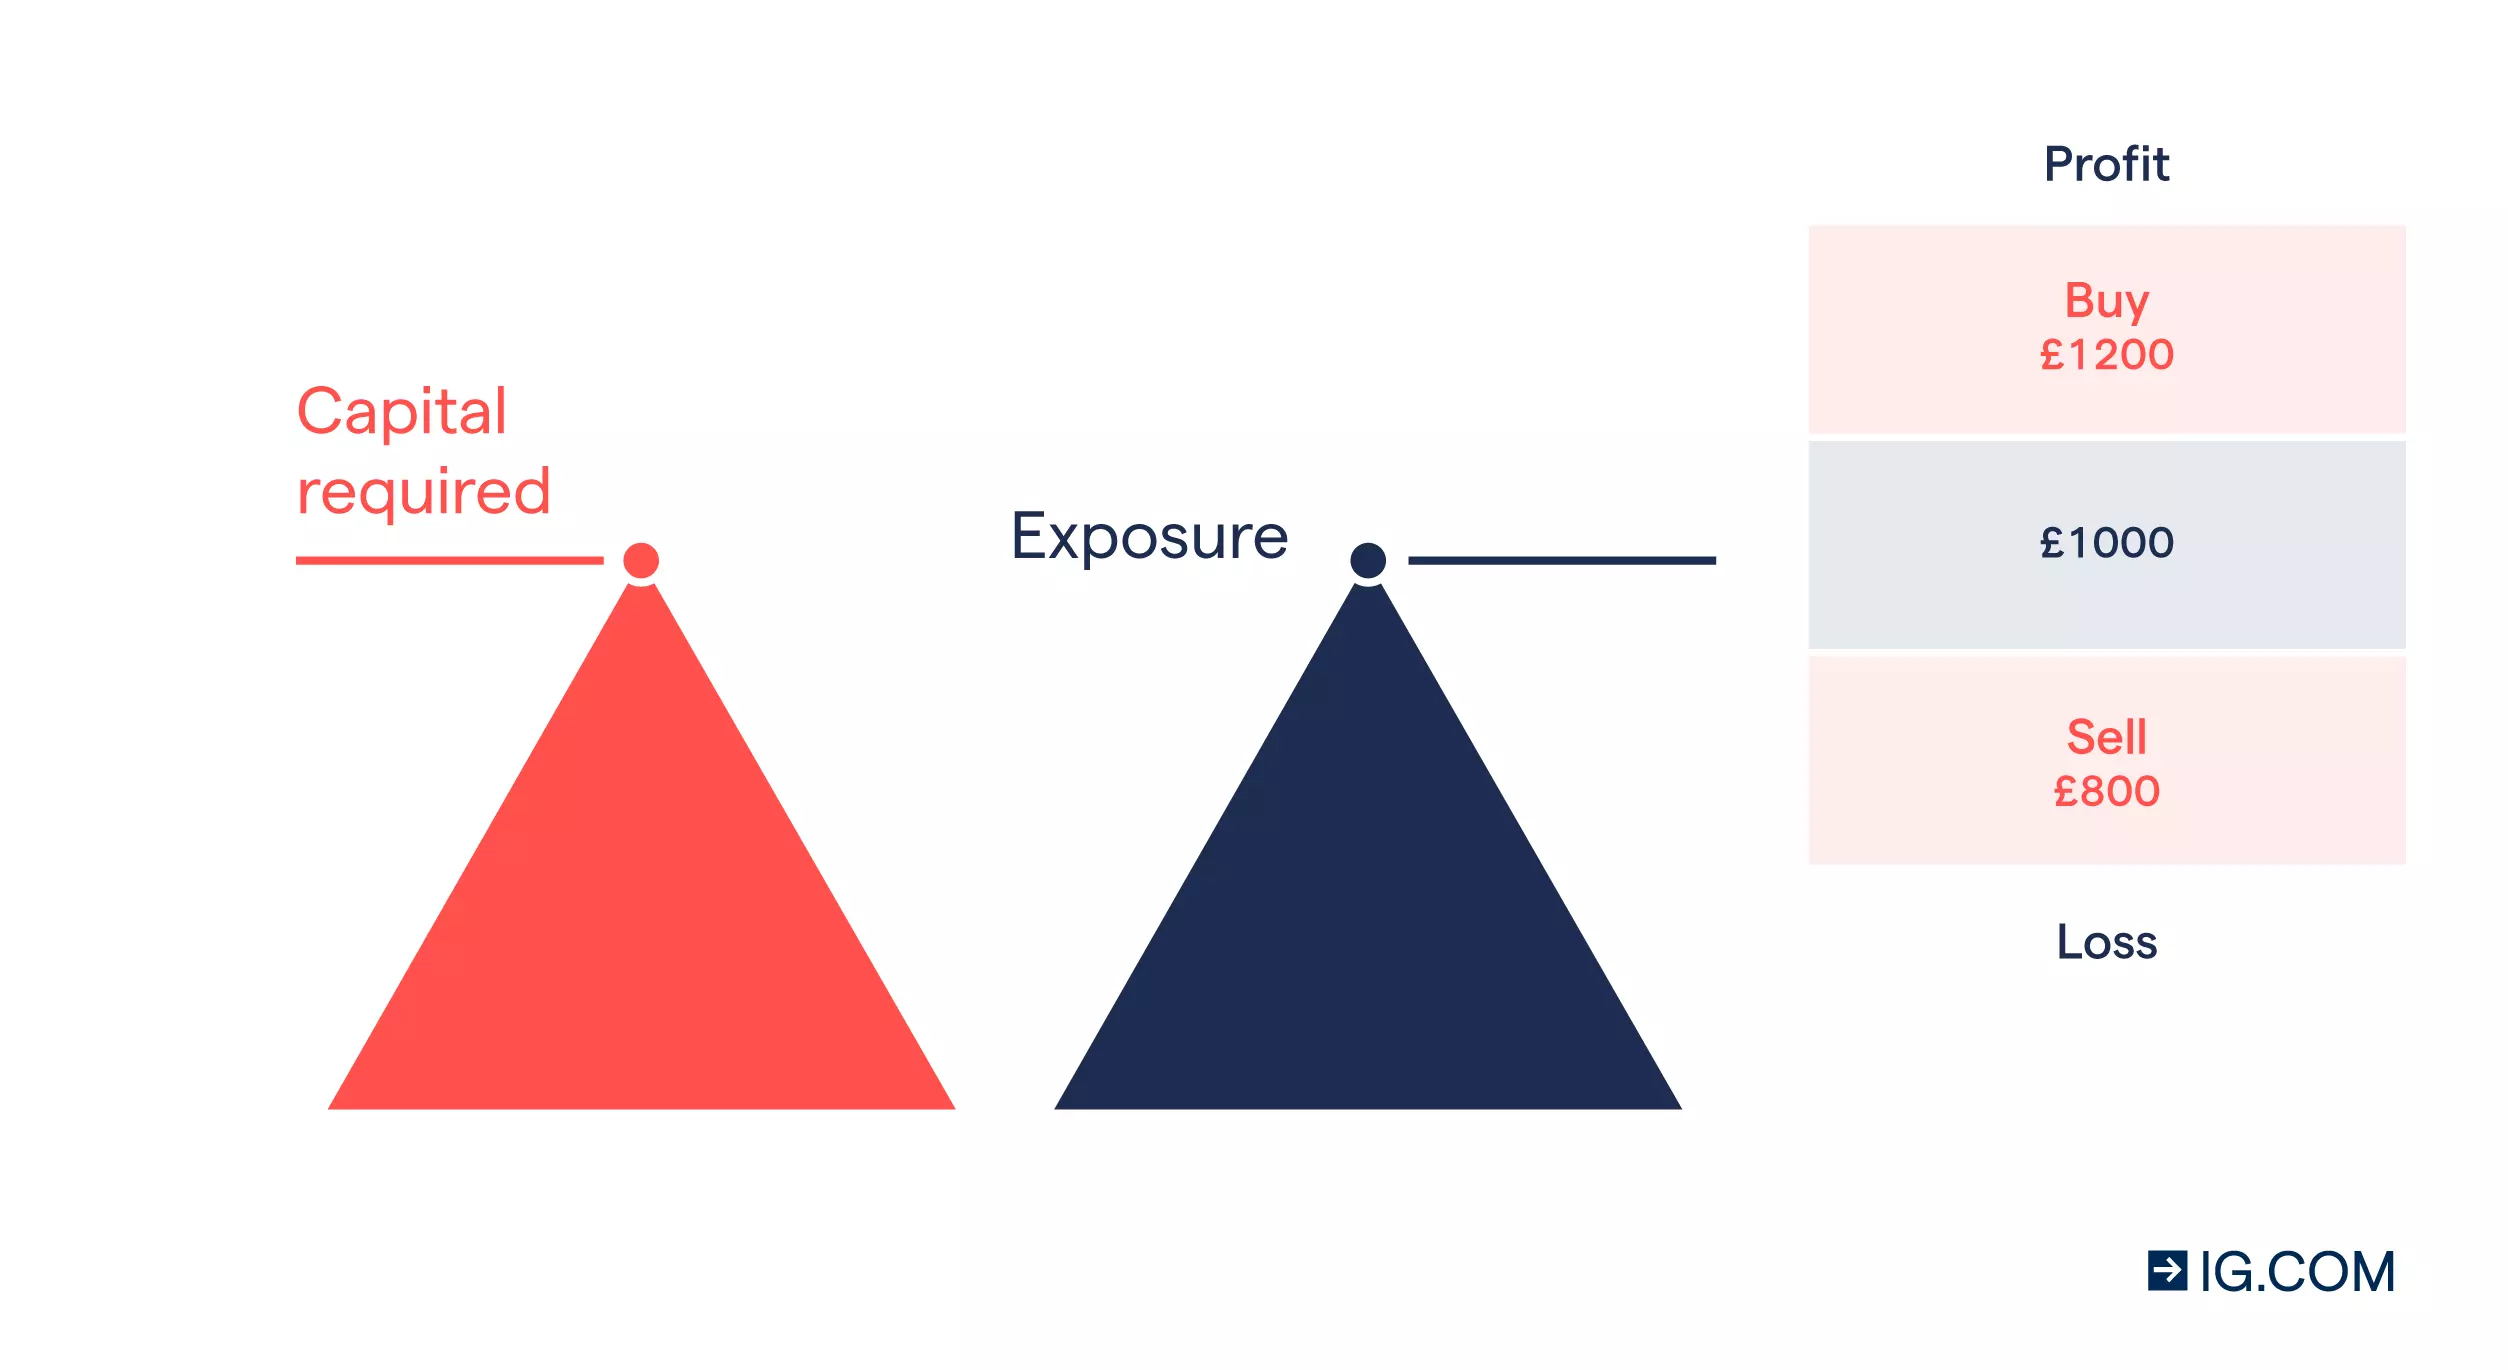 Two side-by-side pyramids representing the capital required to buy shares traditionally and the amount of exposure it offers, which are equal in size.